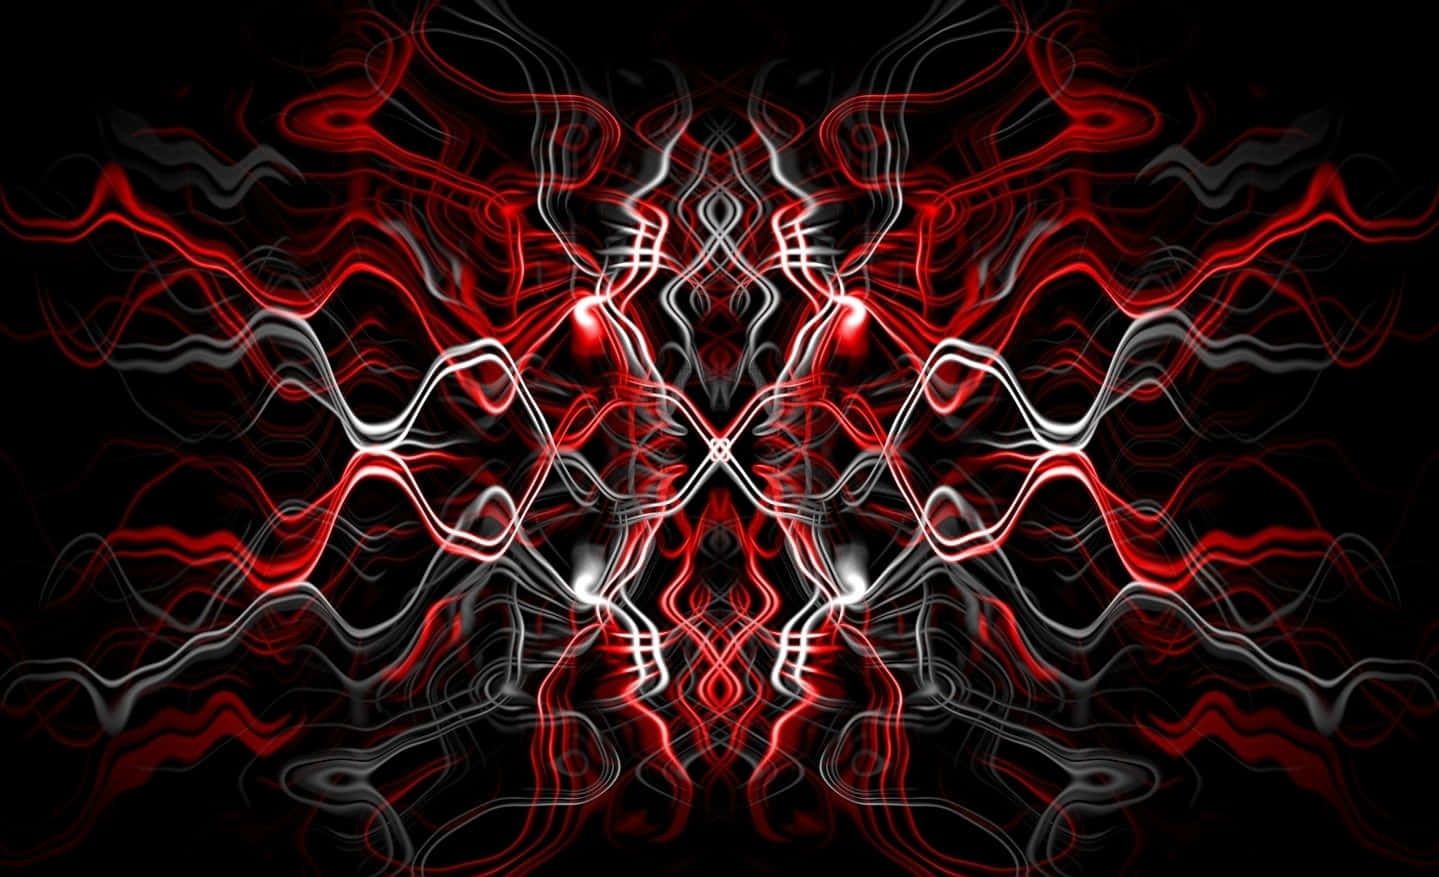 A Red And White Abstract Design On A Black Background